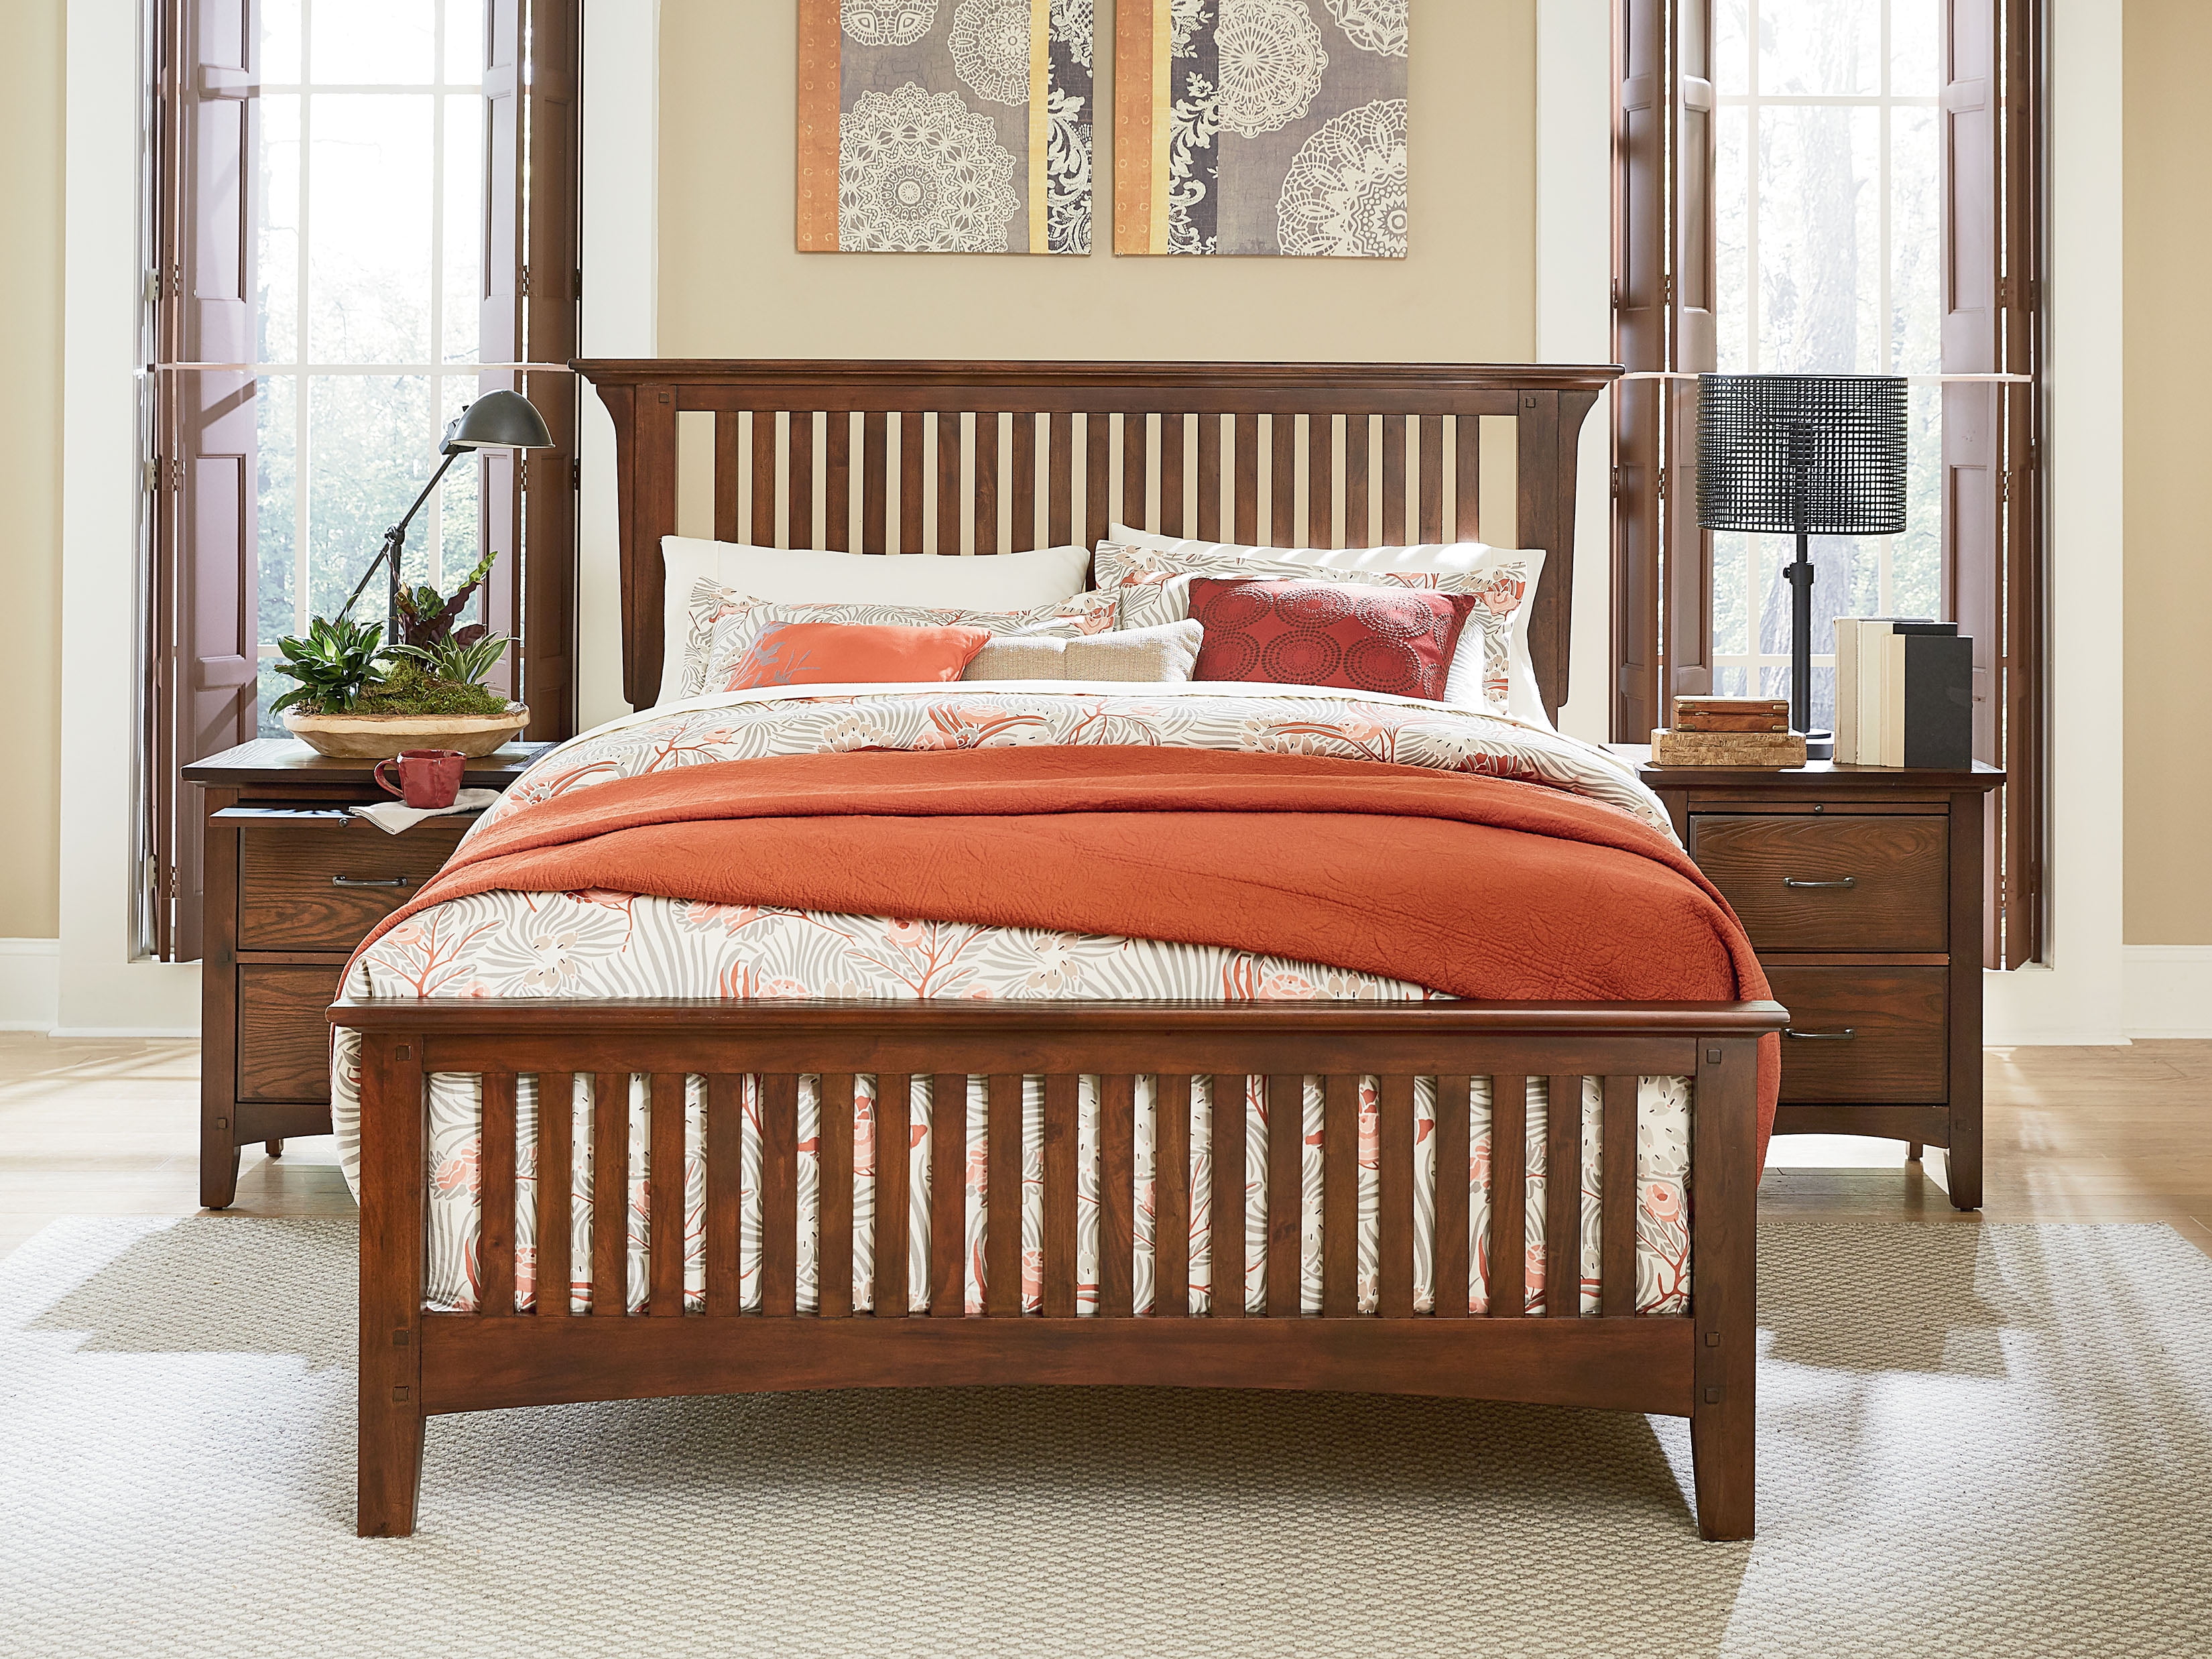 Furnishings Modern Mission King Bed, Mission Style King Headboard